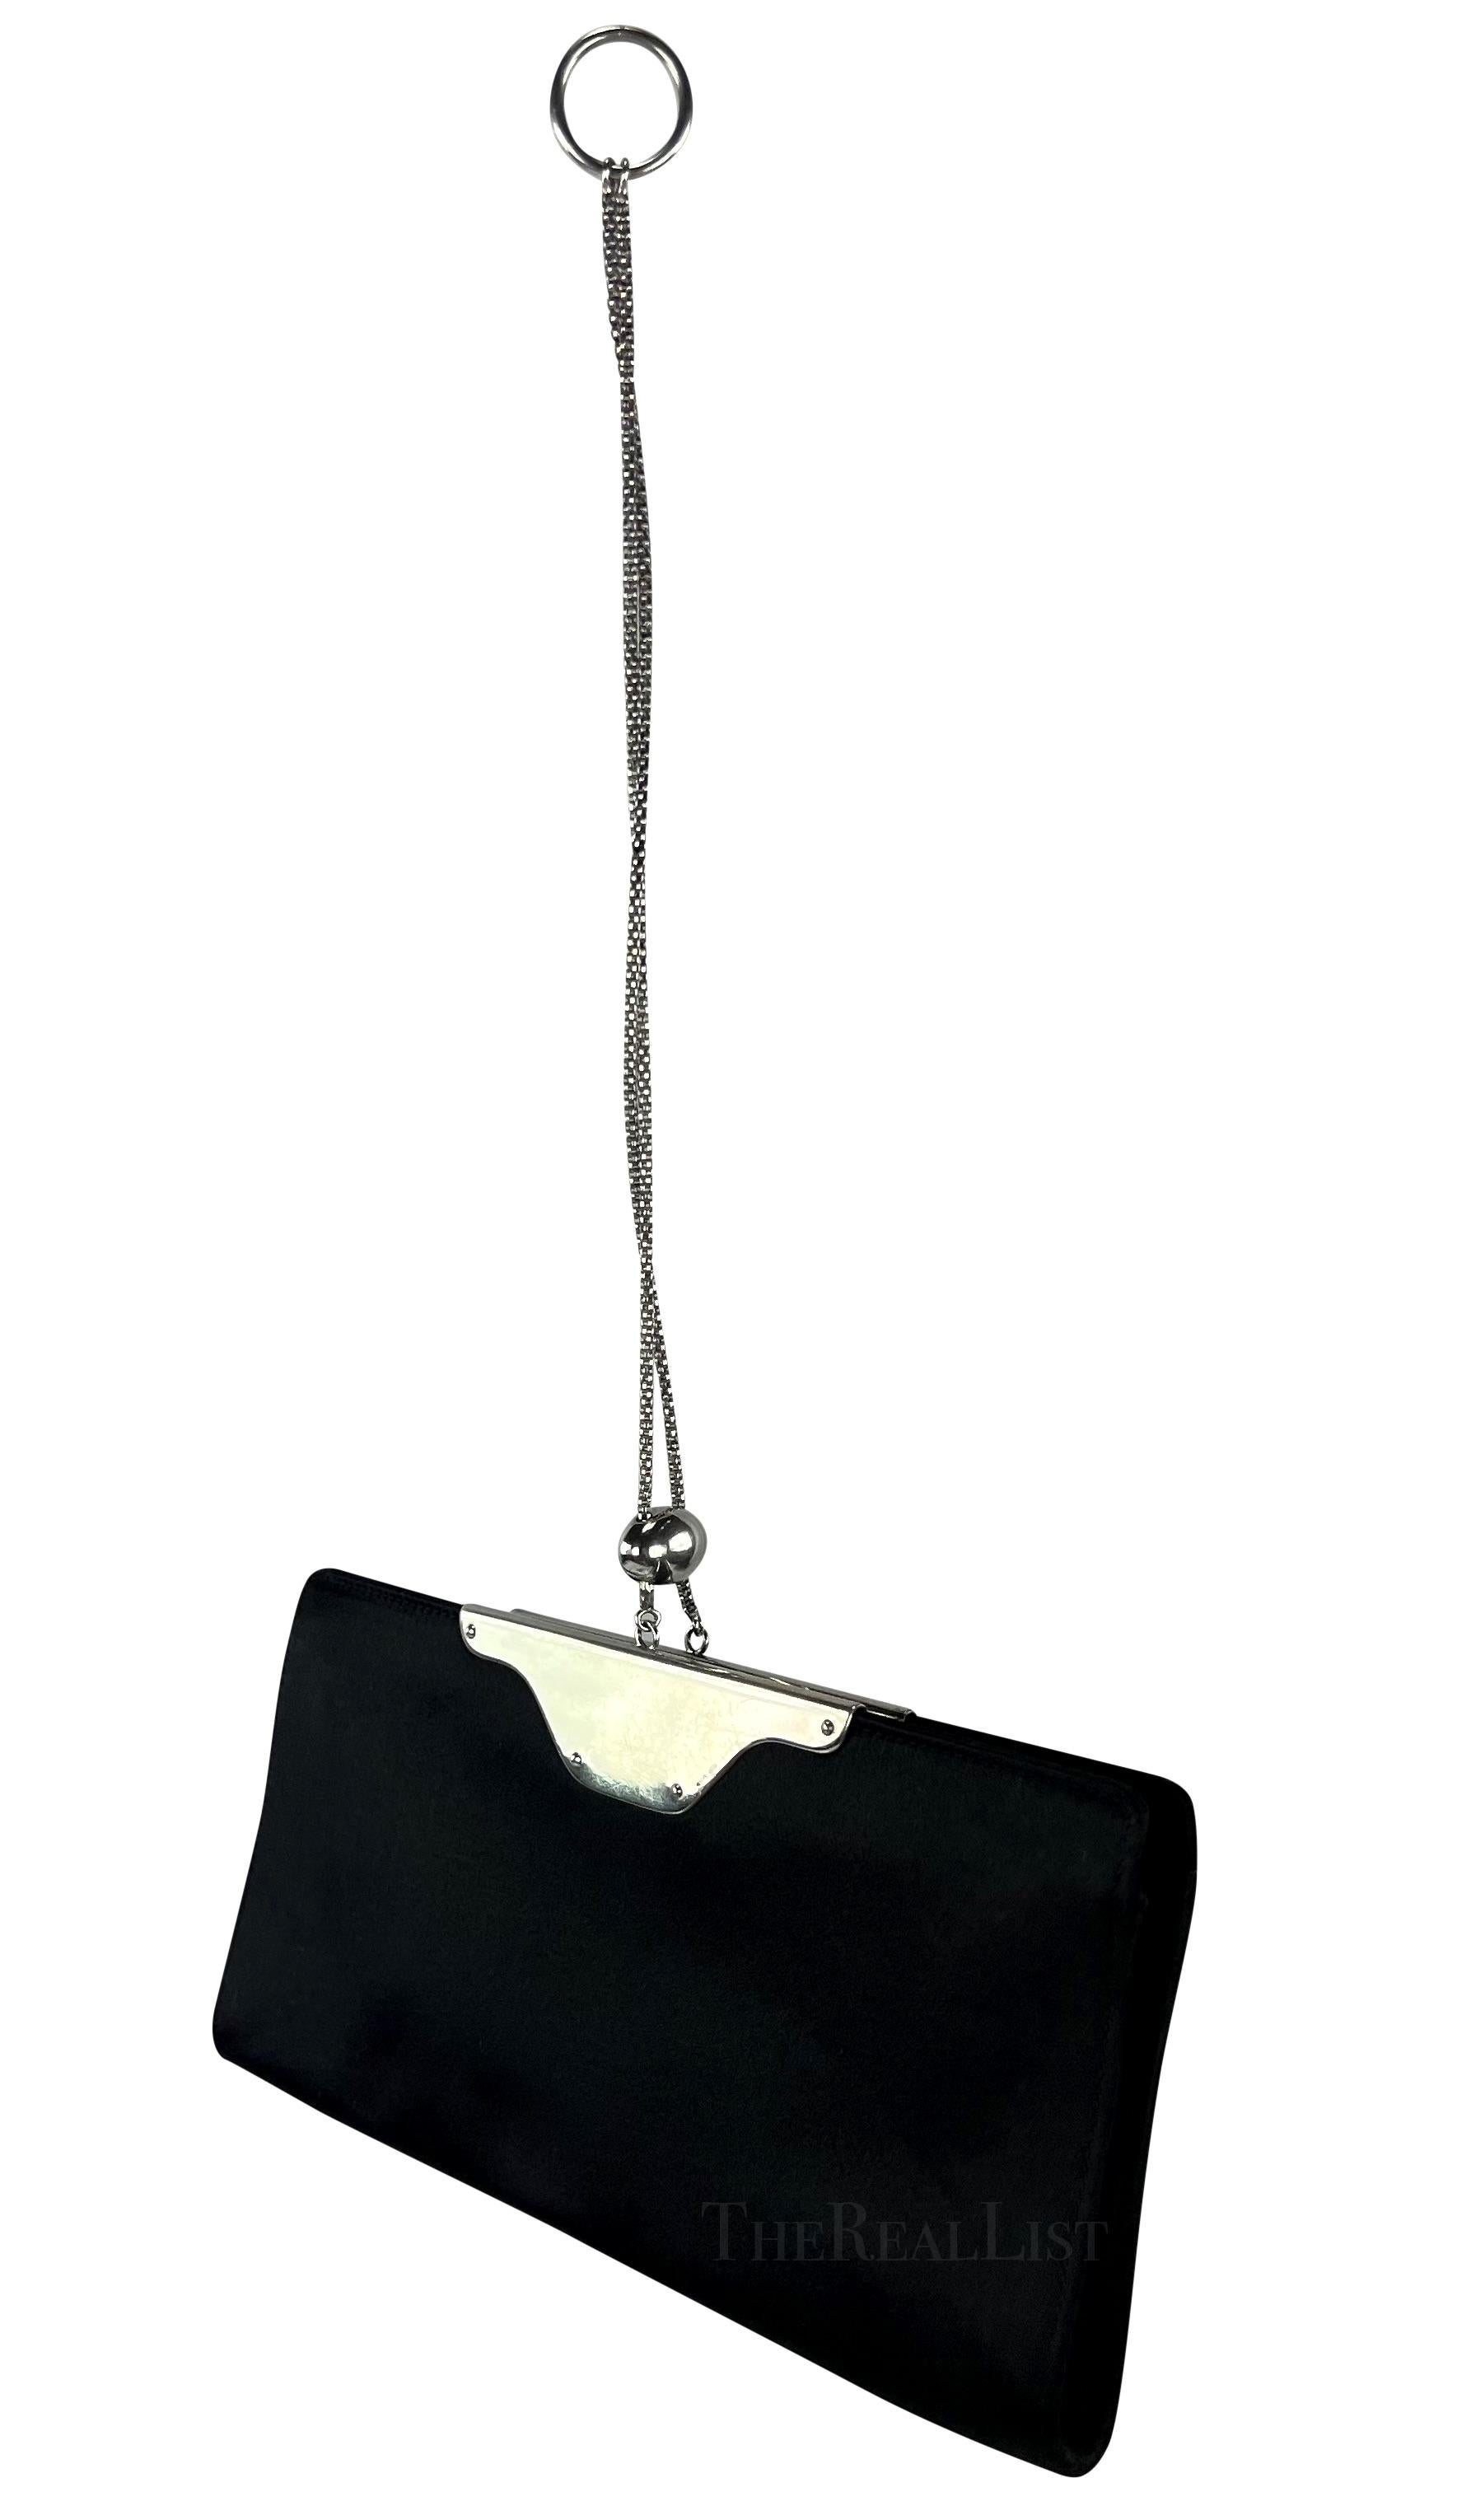 Presenting a fabulous black satin Yves Saint Laurent ring chain clutch. Indulge in the exquisite allure of the fabulous black satin Yves Saint Laurent ring chain clutch, a true fashion statement from the mid-late 2000s. Crafted with meticulous